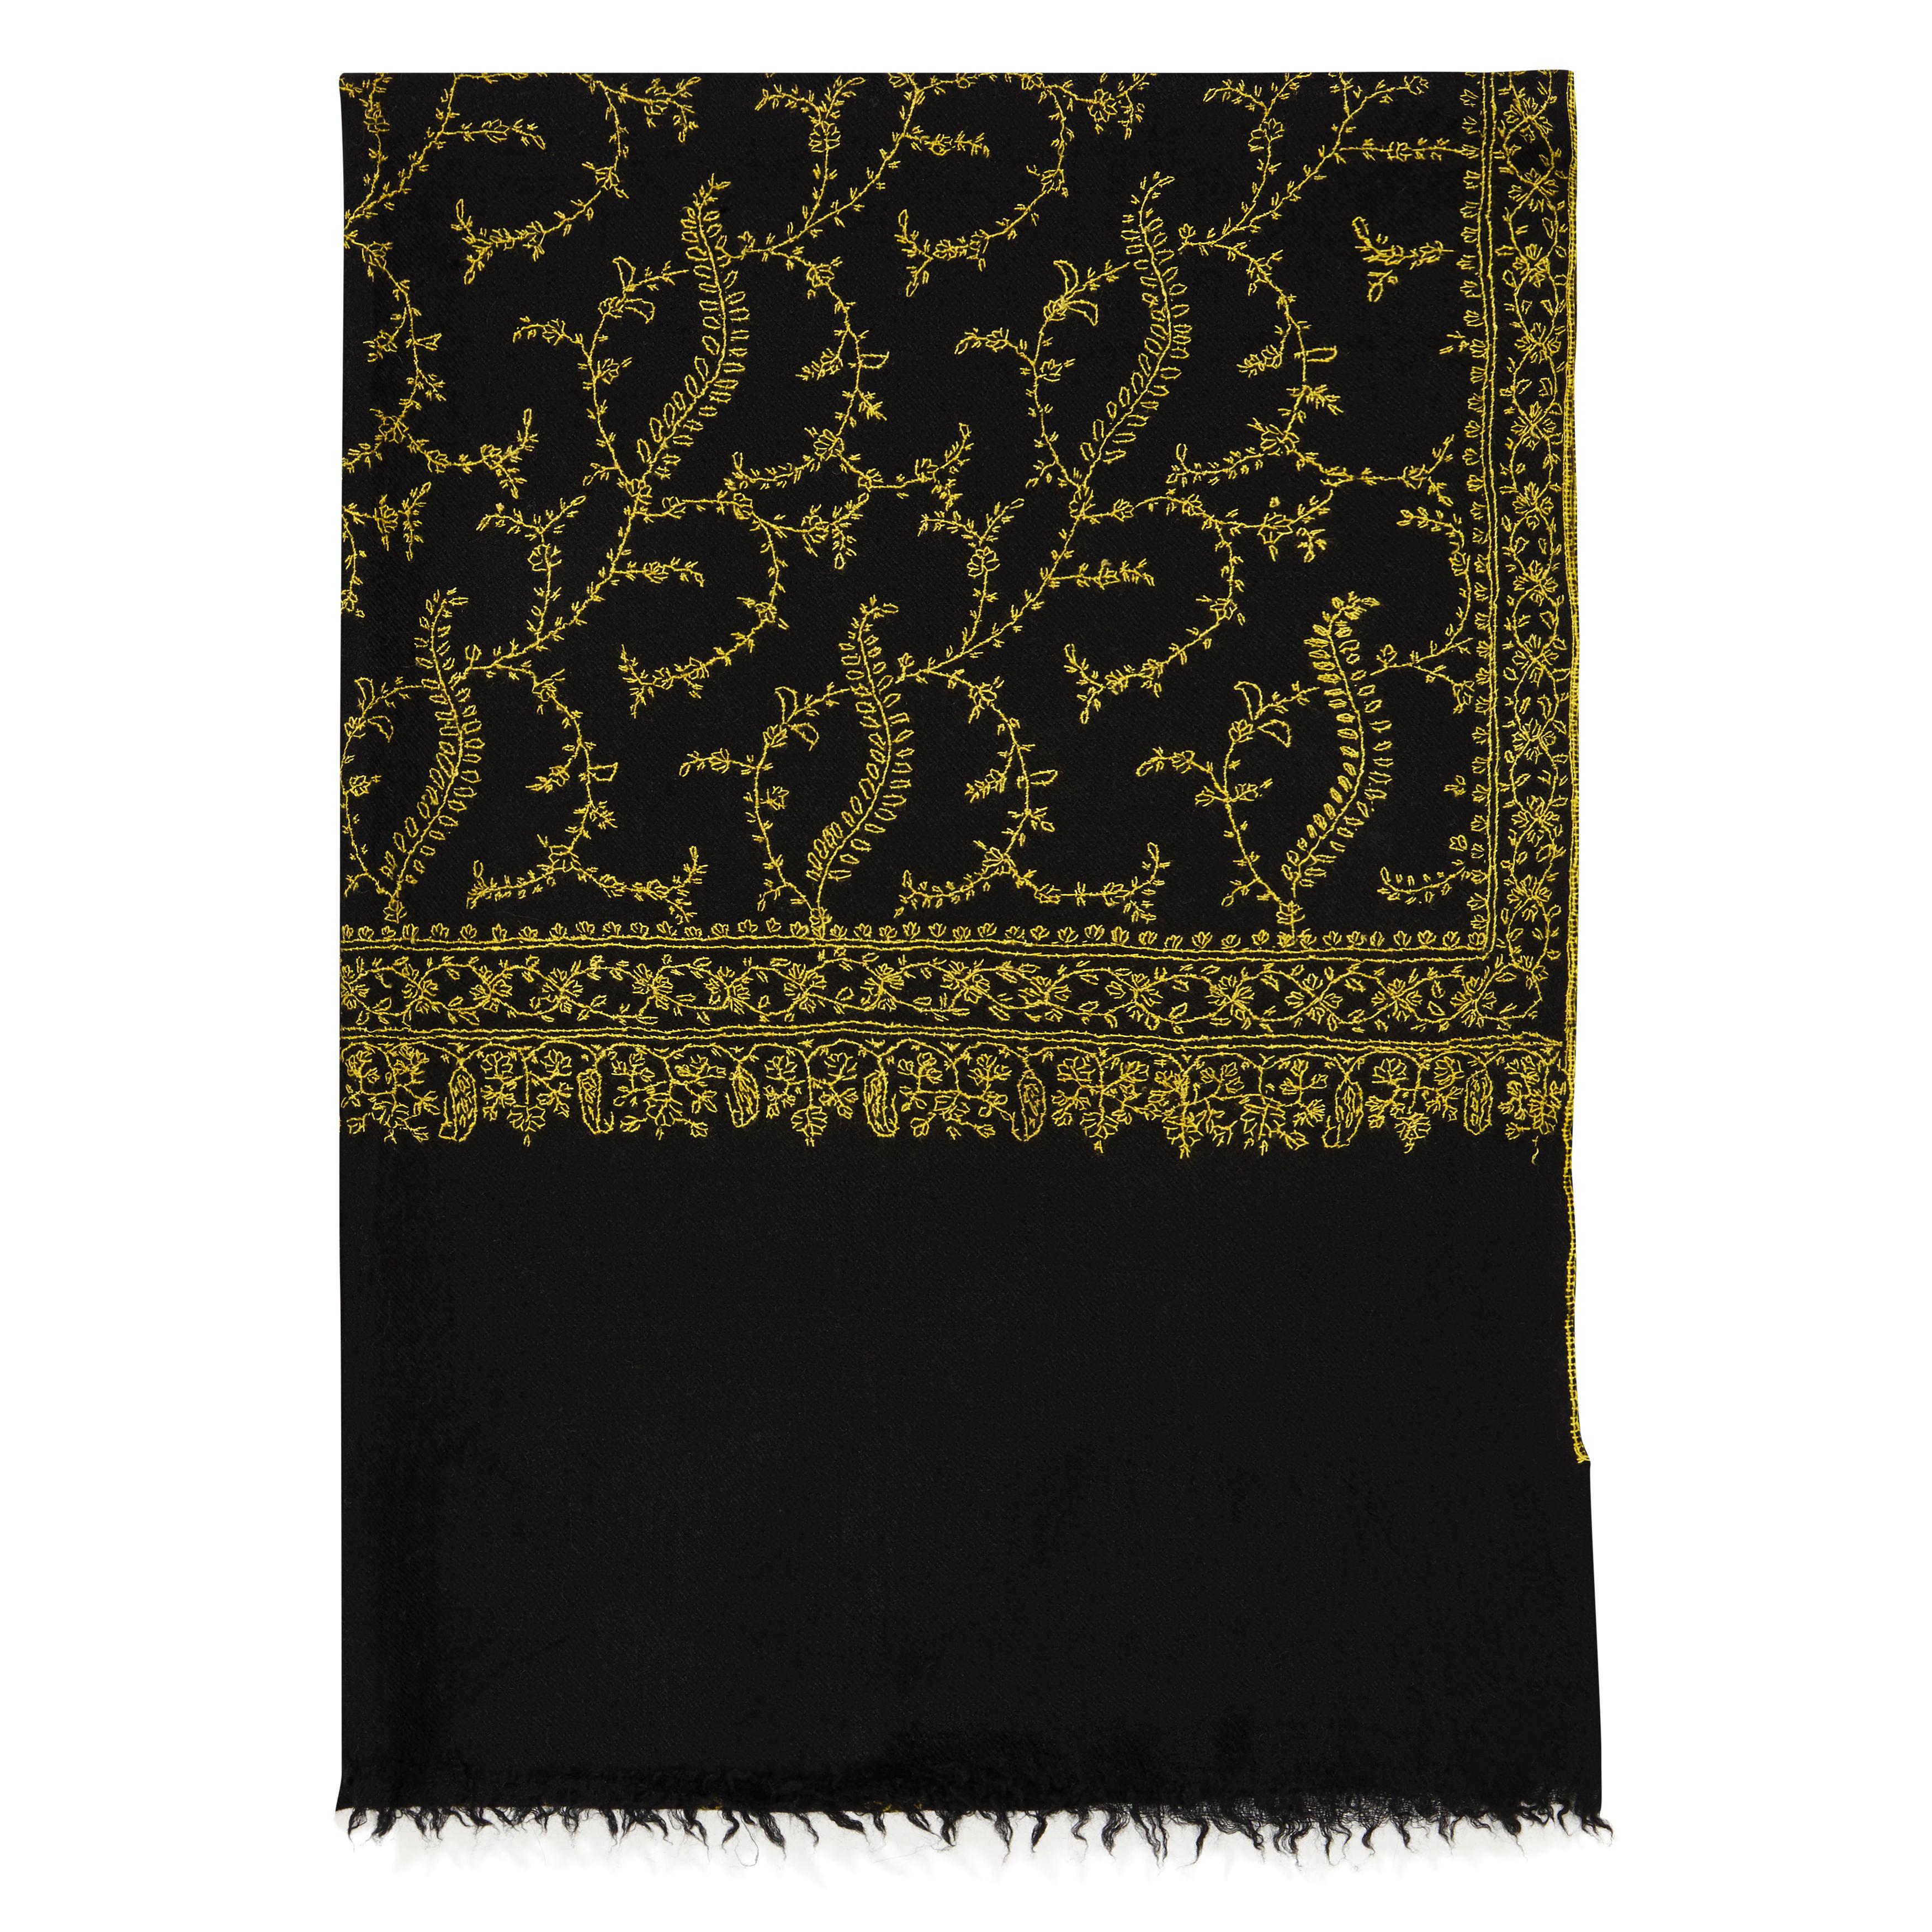 The perfect Valentines gift for someone special - this shawl is unique and handmade. 
Verheyen London’s shawl is spun from the finest embroidered woven cashmere from Kashmir.  The embroidery can take up to 1 year to embroider these shawls and each